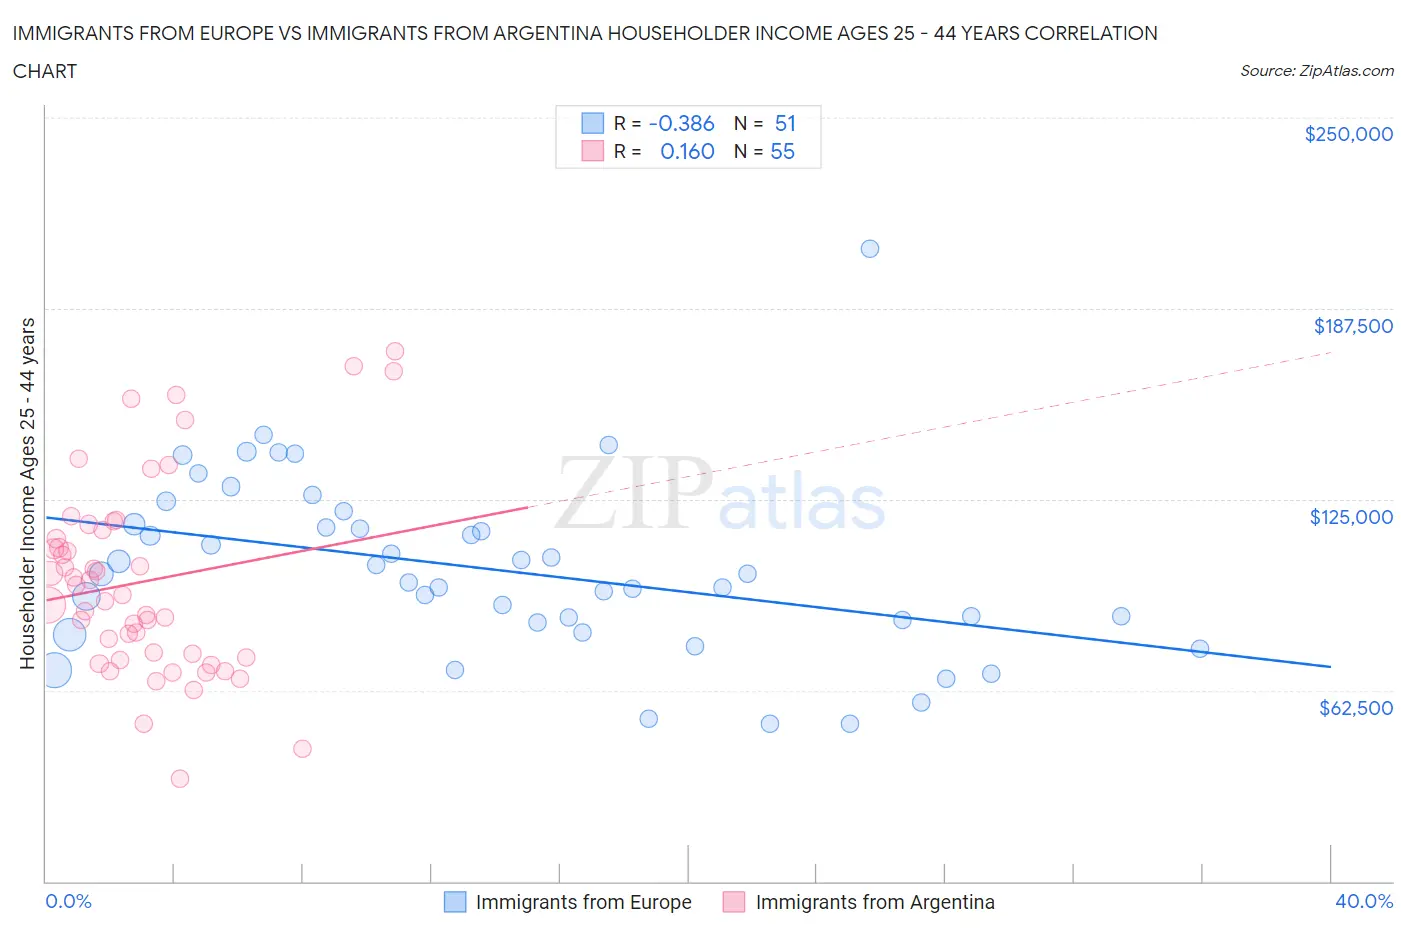 Immigrants from Europe vs Immigrants from Argentina Householder Income Ages 25 - 44 years